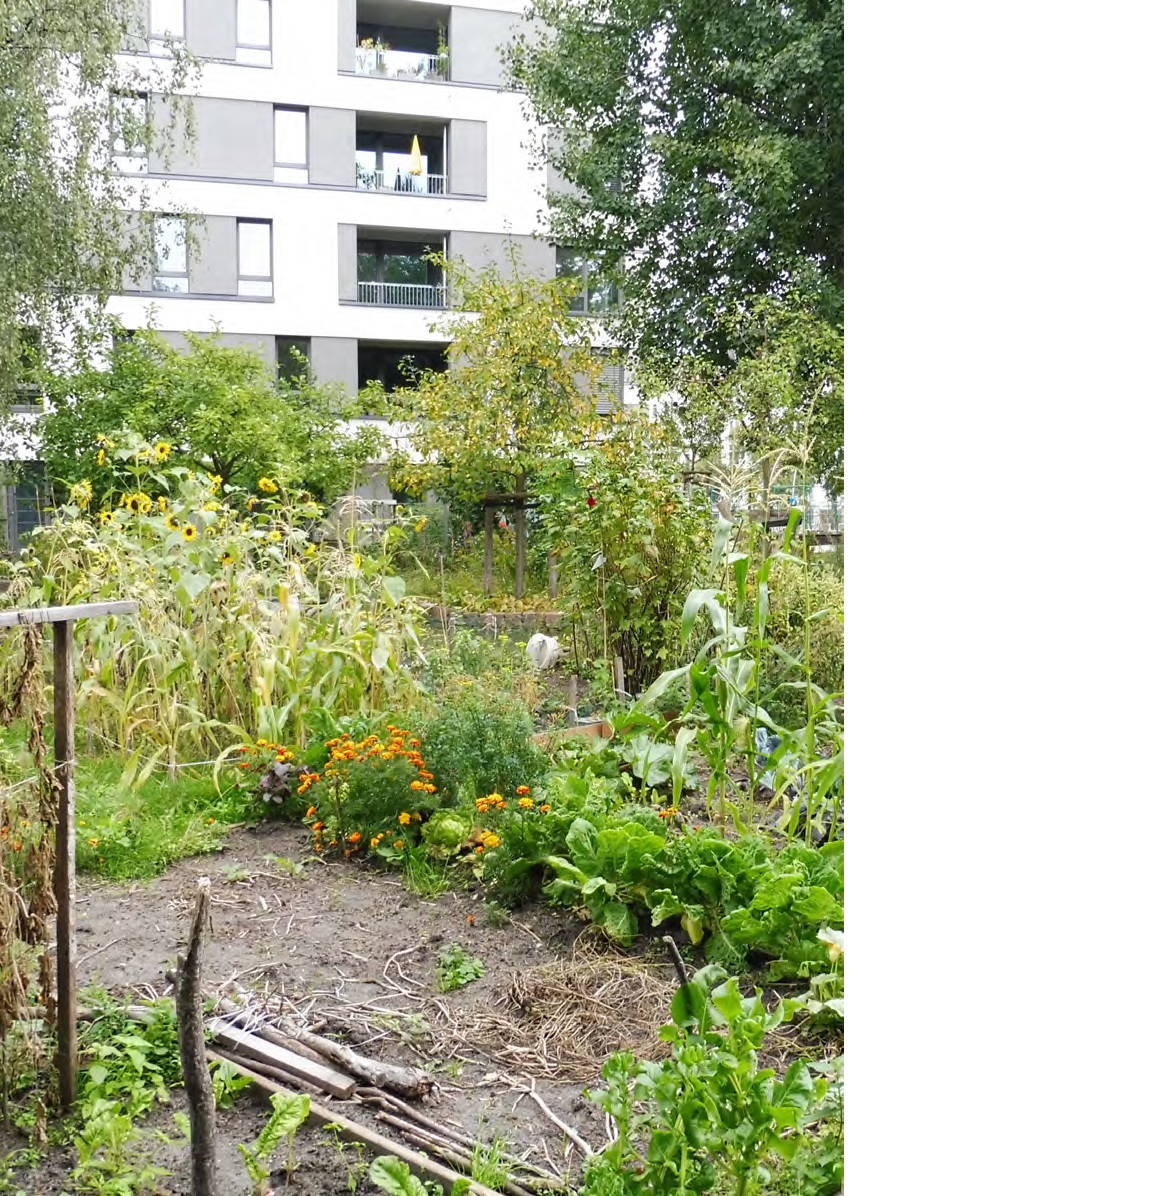 1/4 NEW PAPER on #urbangardening #urbangardens: 
Towards an integrated garden. Gardeners of all types, unite!

#urbangarden #allotment #allotmentUK #allotmentgardens #community #solidarity #trust #naturebasedsolutions #communitygarden #communitygardening

authors.elsevier.com/c/1gYuX5m5d7ze…